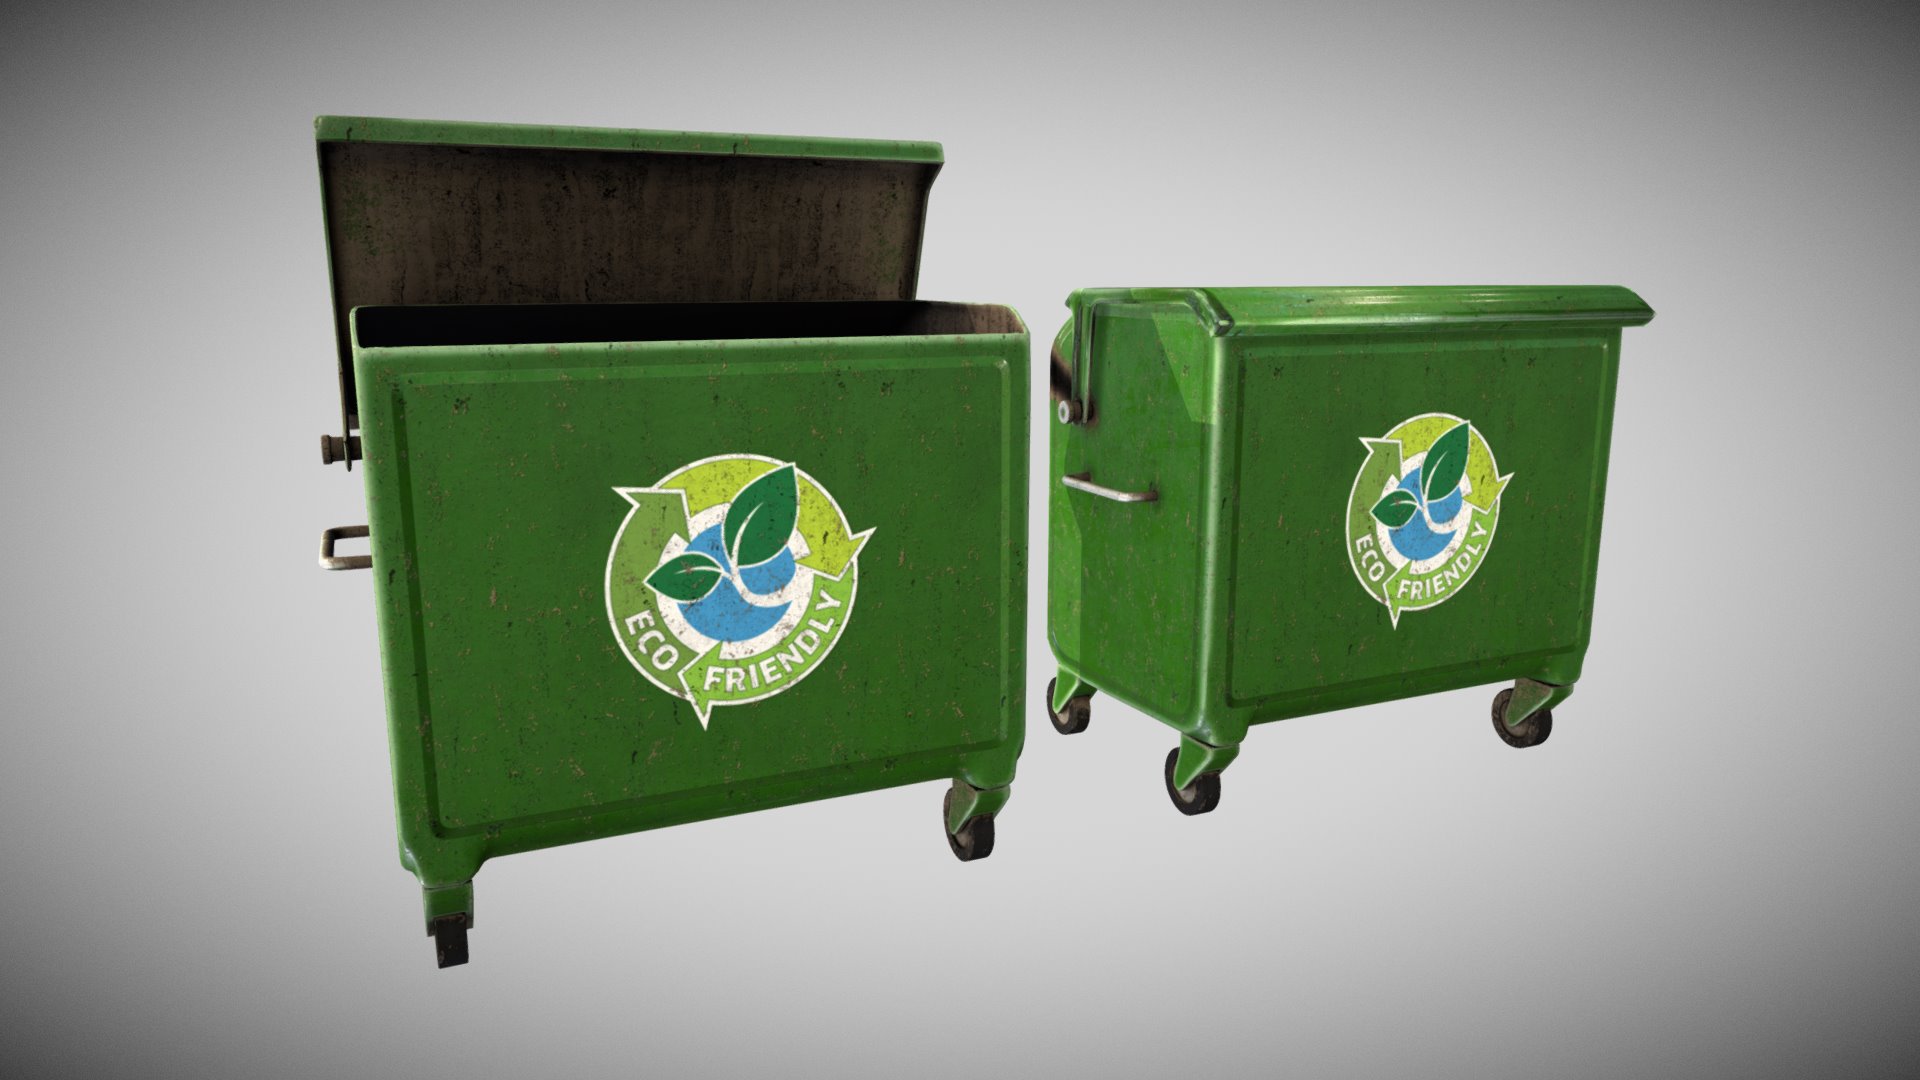 3D model Trash Boxes - This is a 3D model of the Trash Boxes. The 3D model is about a couple of green garbage cans.